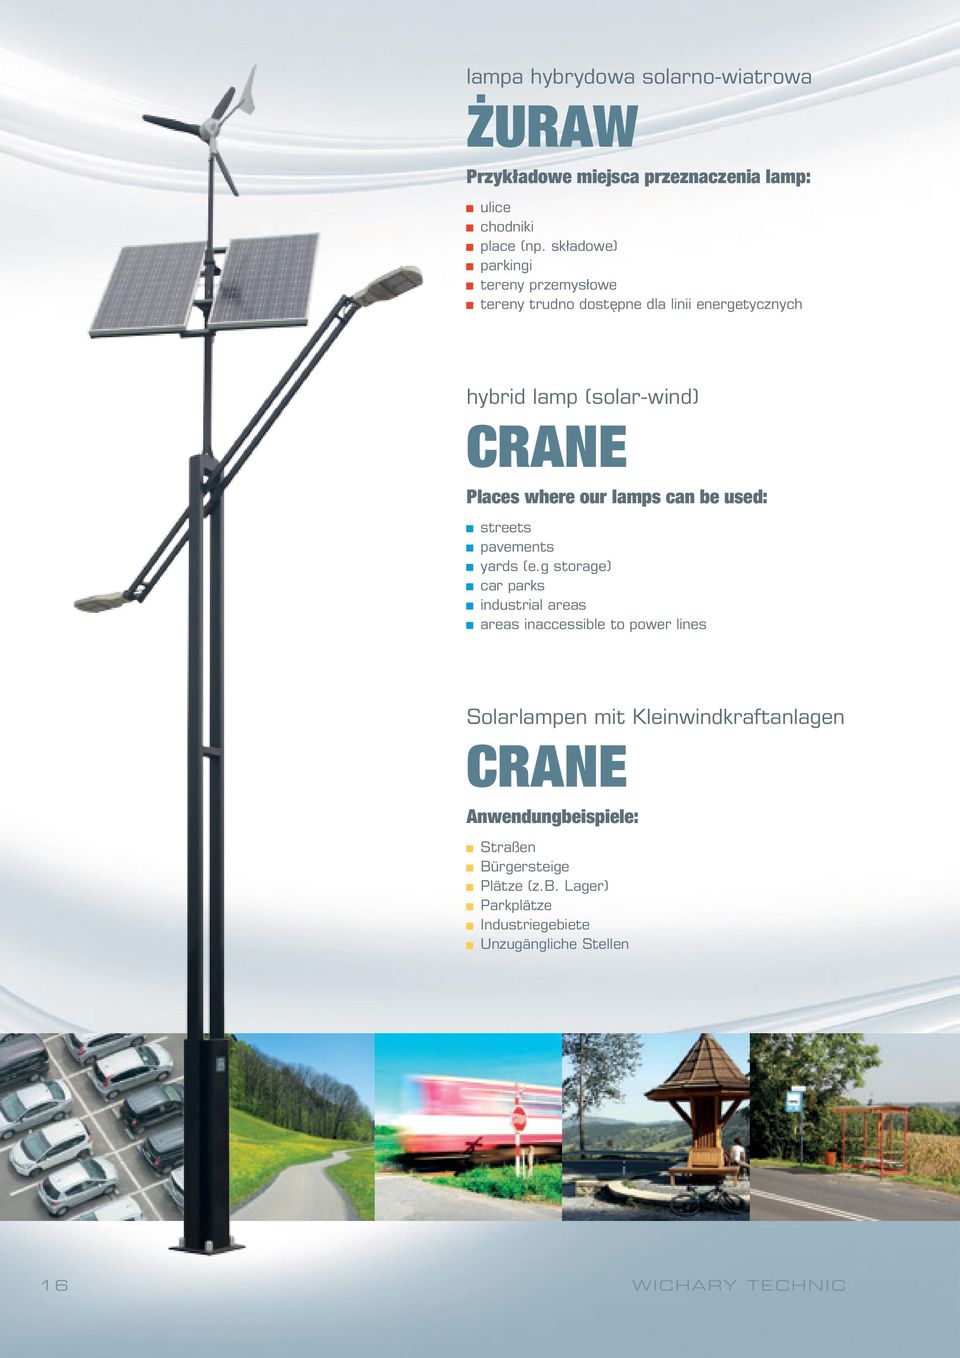 our lamps can be used: streets pavements yards (e.